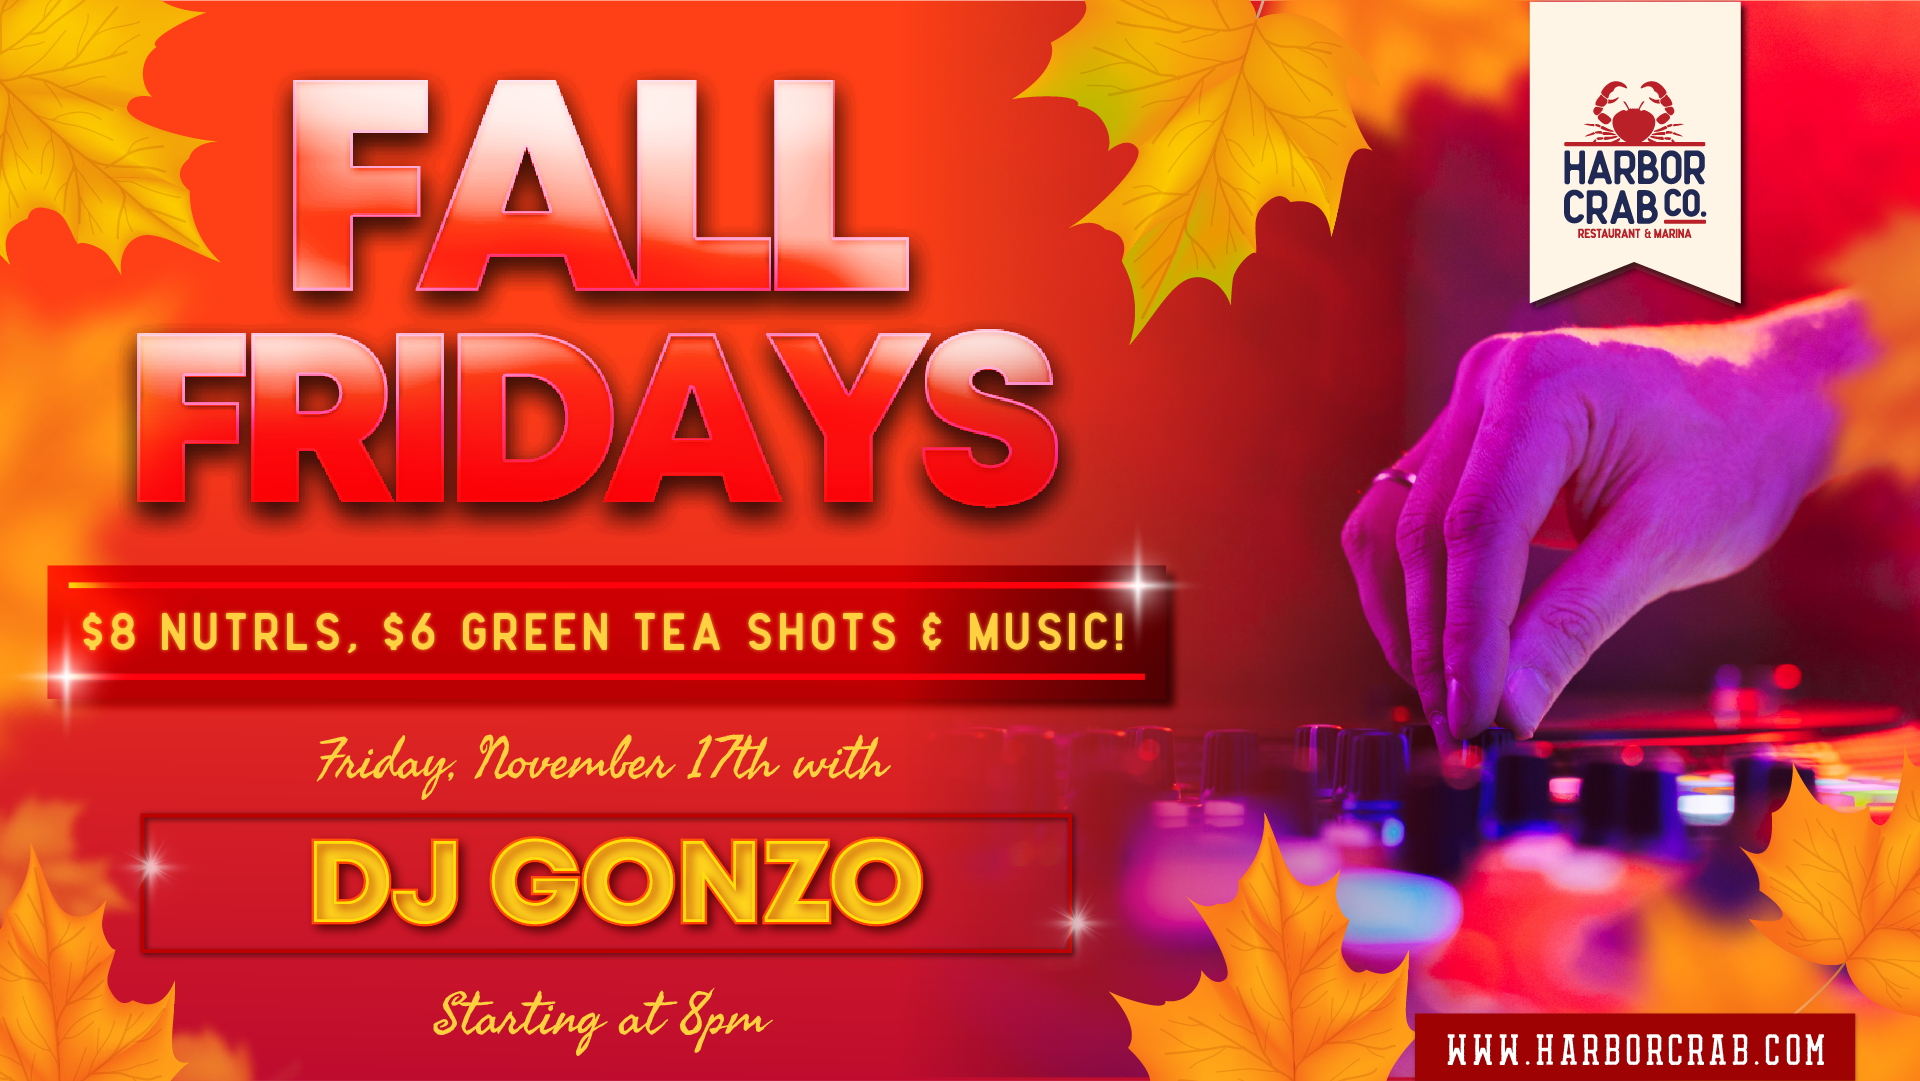 Fall Friday with DJ Gonzo on Friday, November 17th at 8pm